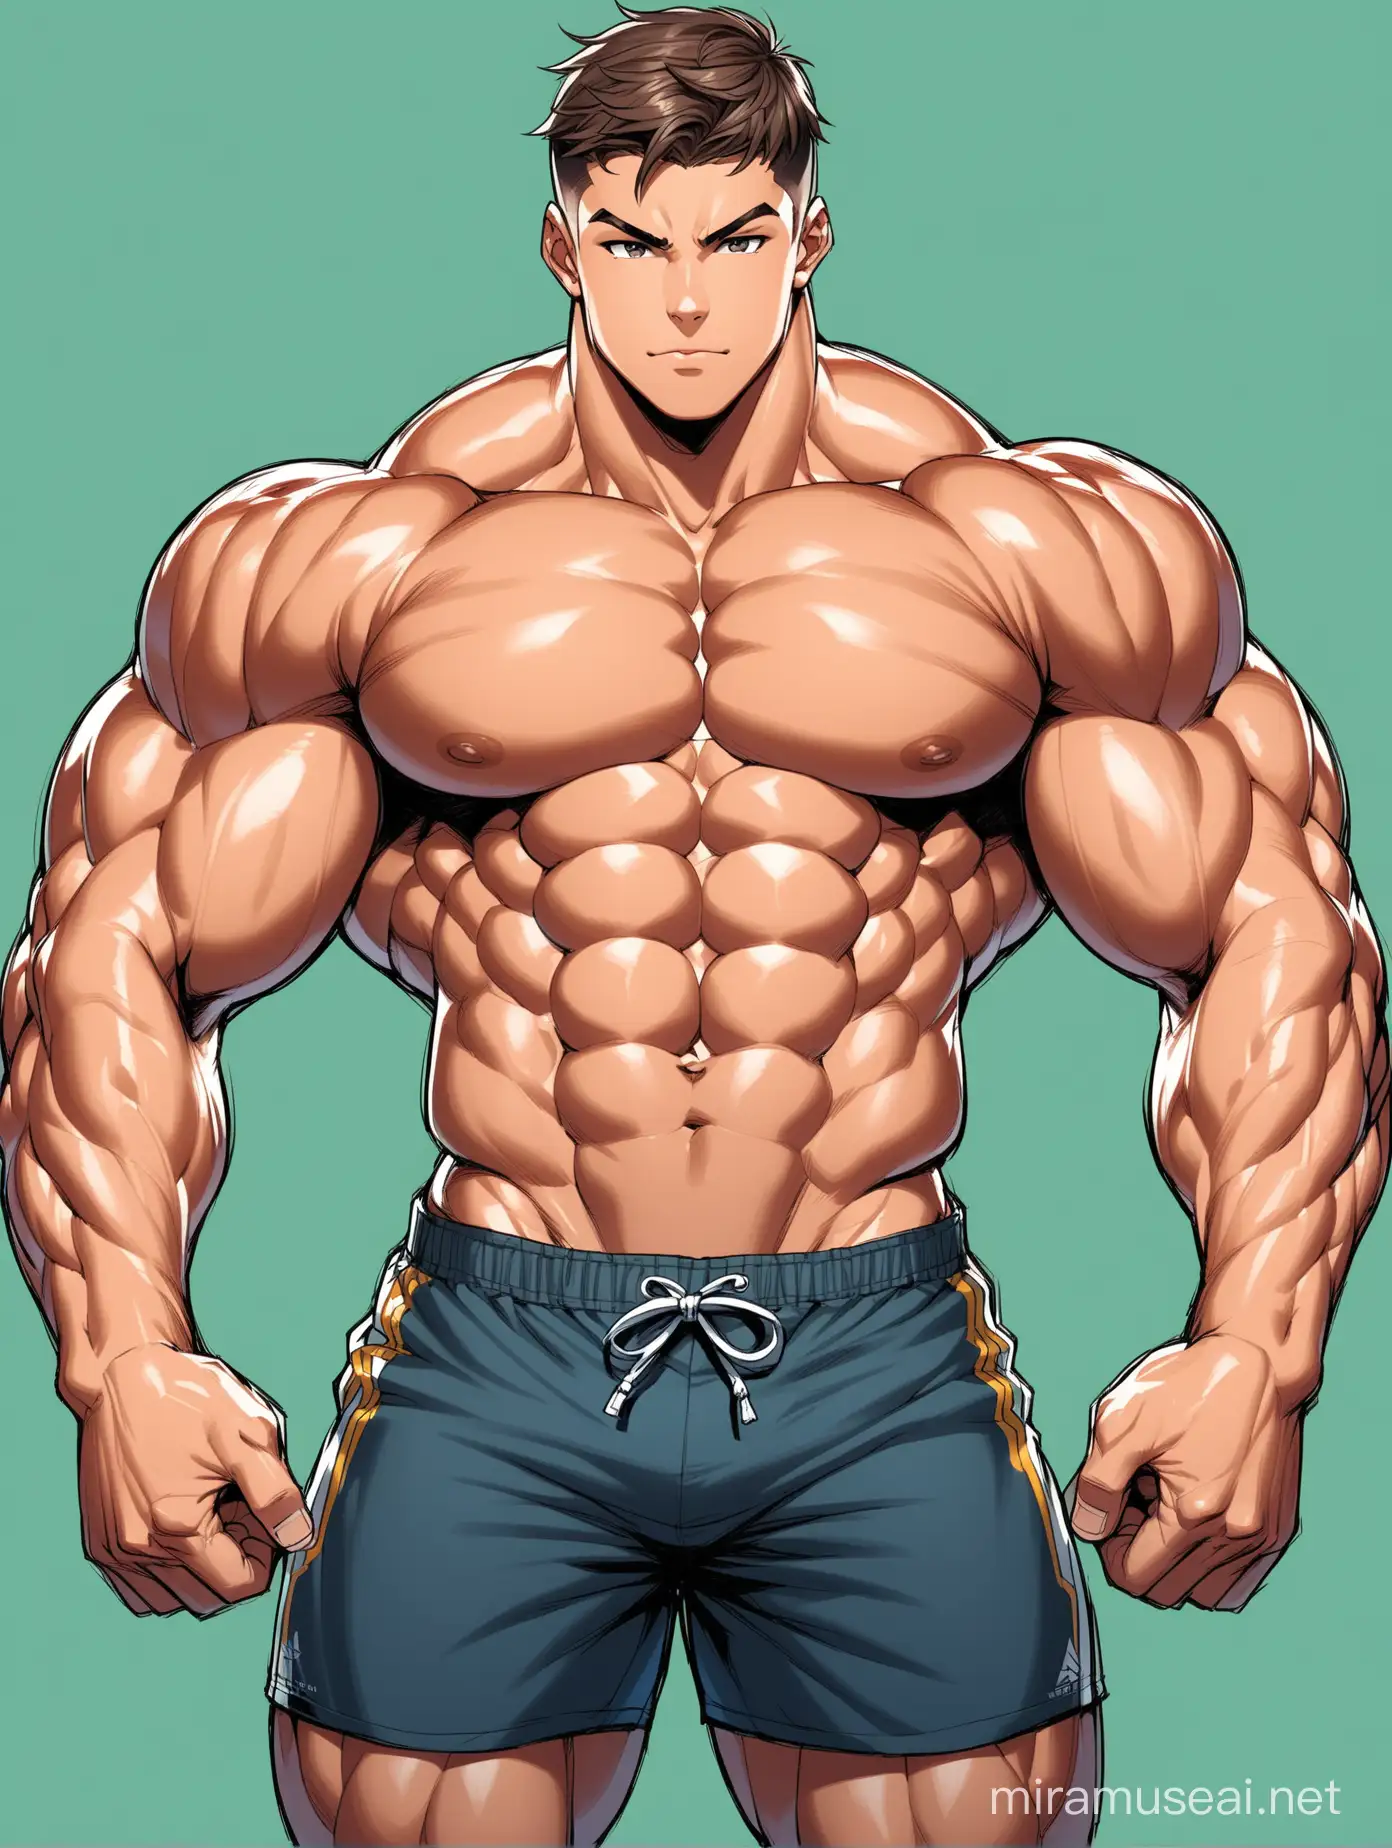 Full color drawing of an extremely muscular teenage male with a very beautiful, delicate face, wide shoulders, huge biceps, hard six-pack abs, and very strong and powerful legs, wearing shorts or trunks